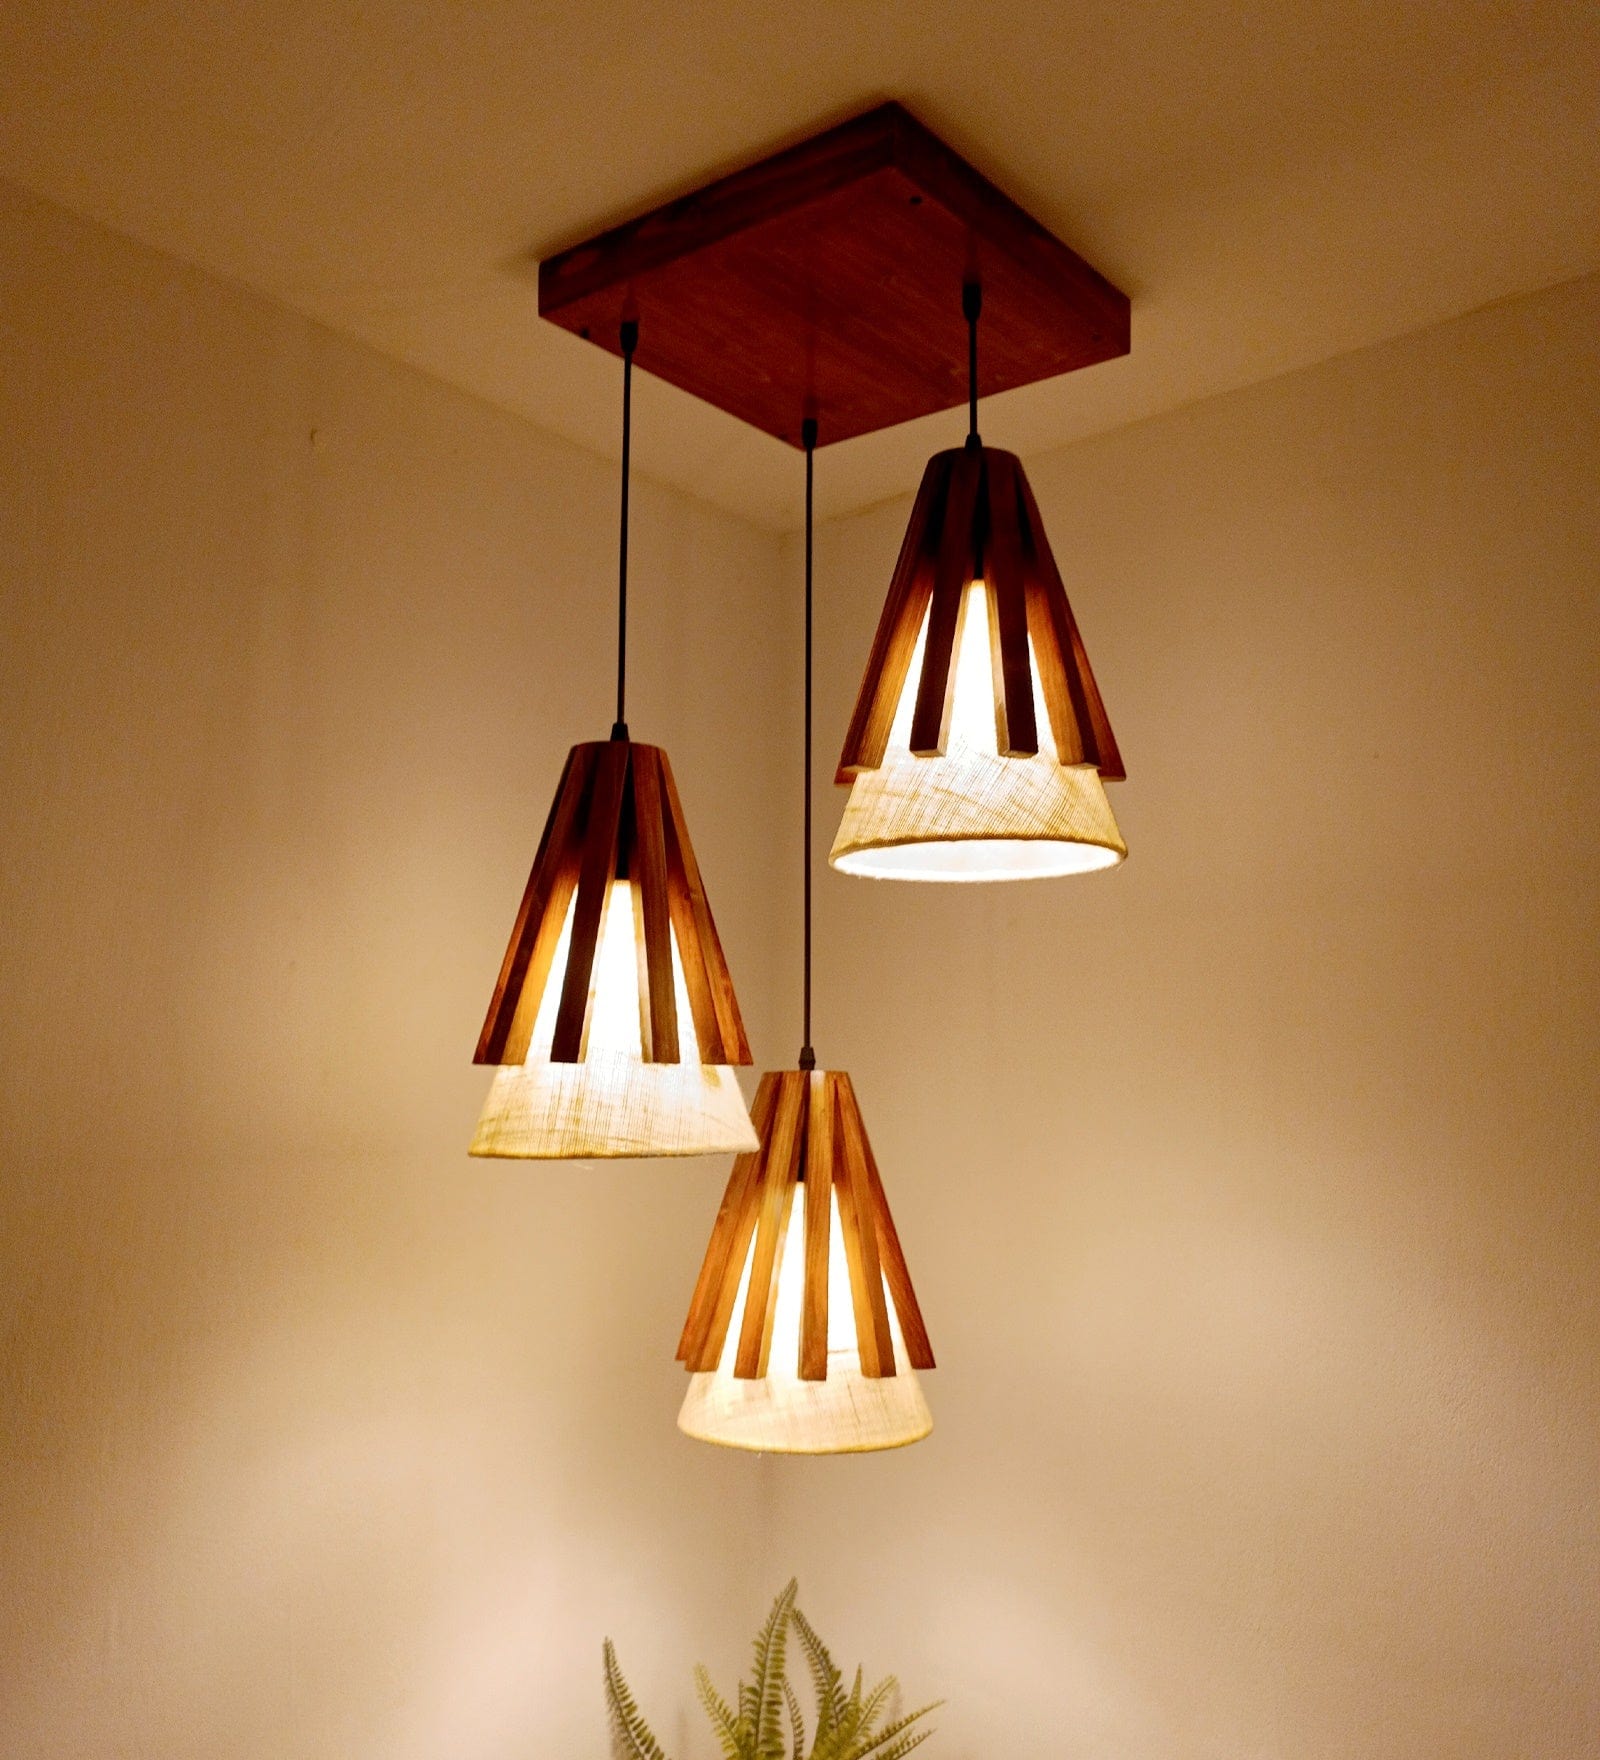 Flue Brown Wooden Cluster Hanging Lamp (BULB NOT INCLUDED)